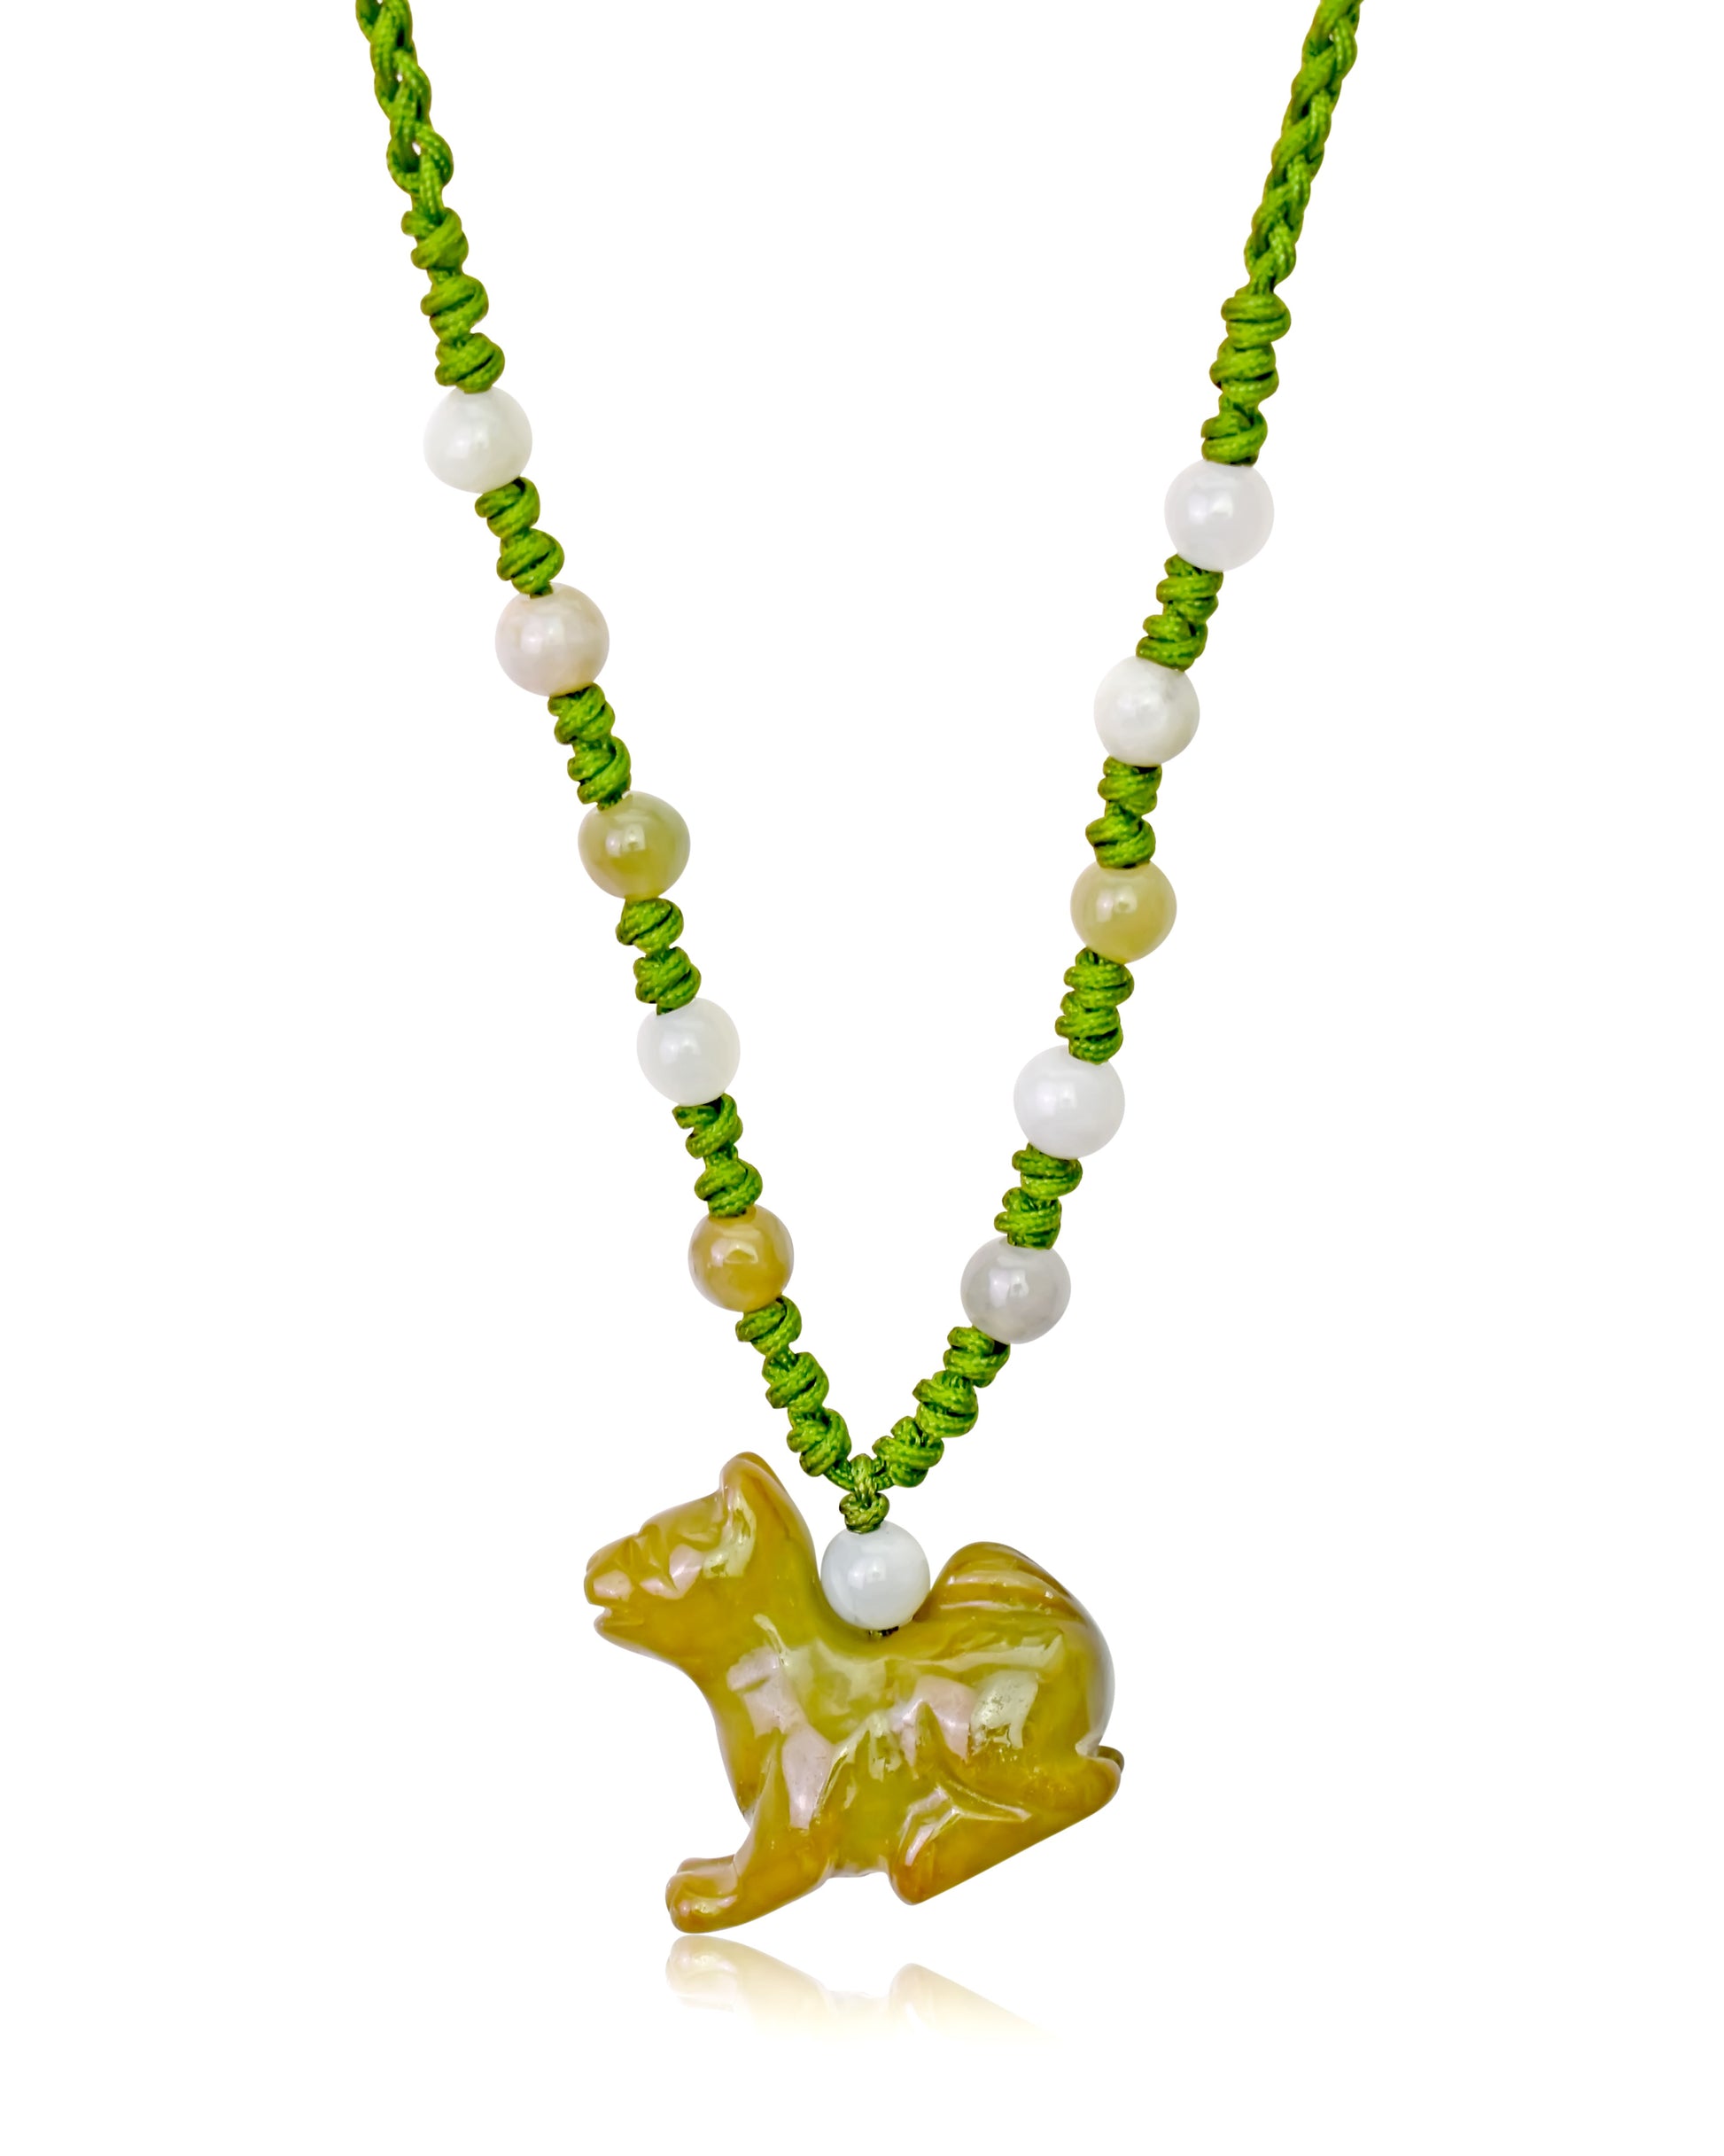 A Unique and Personal Gift: Dog Zodiac Handmade Jade Necklace Pendant